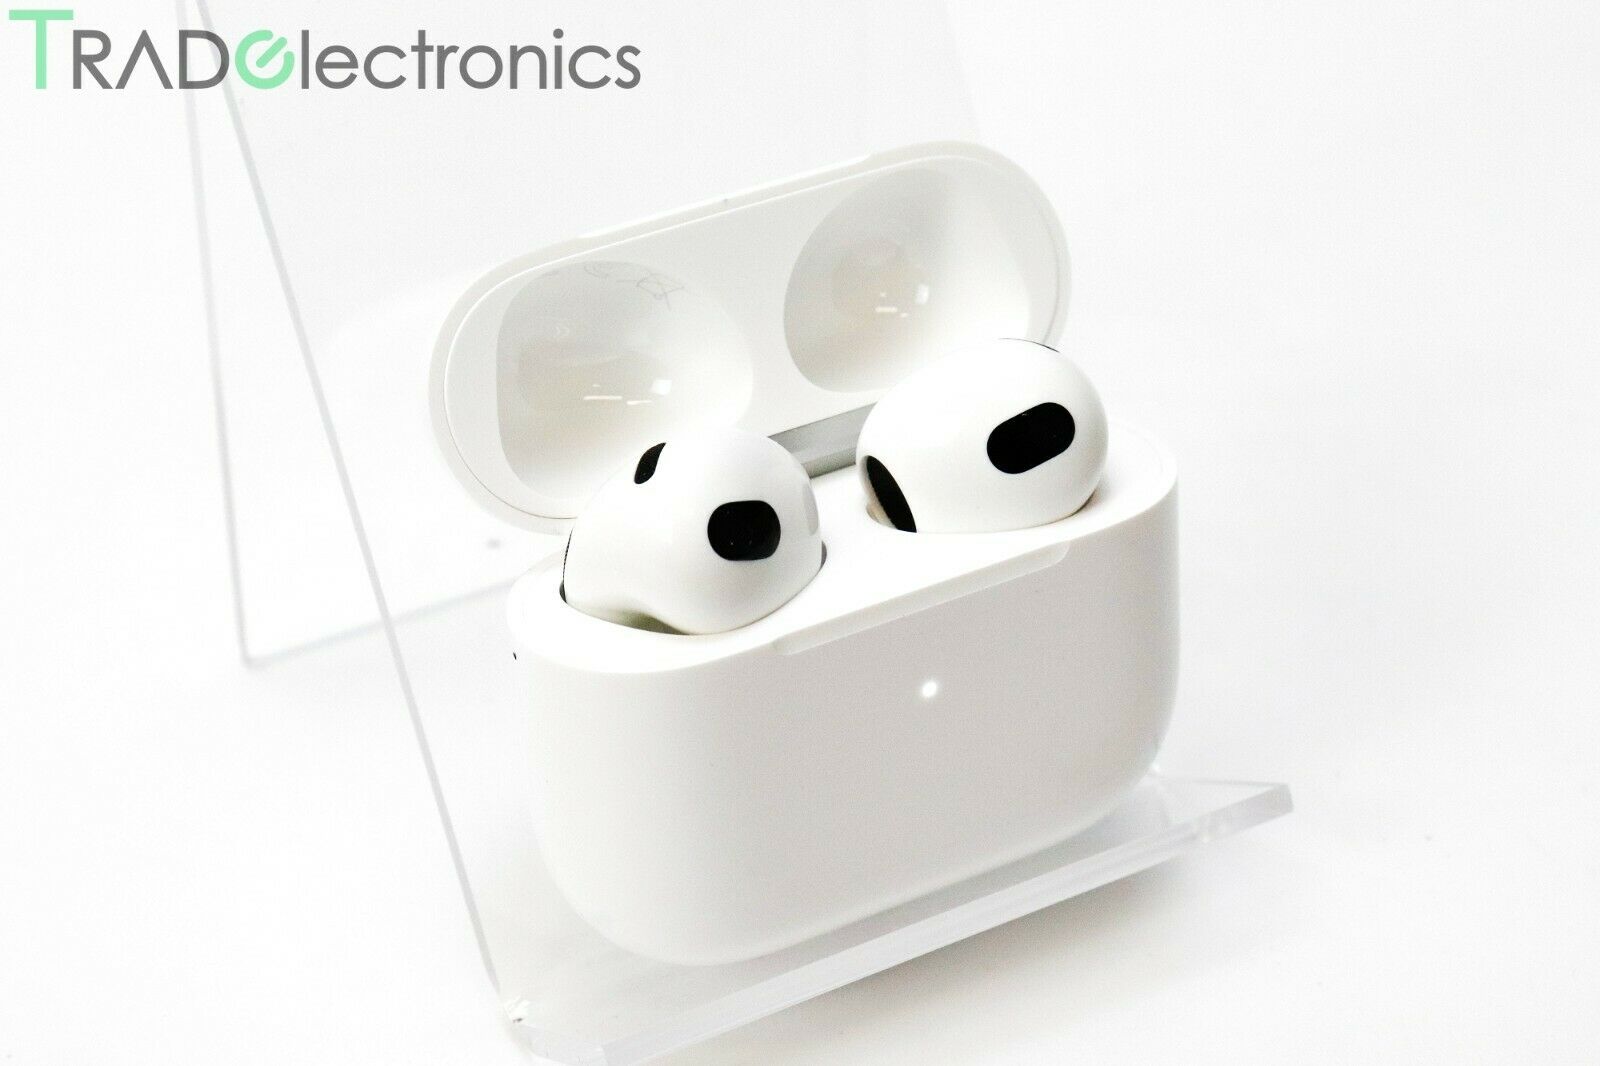 A2564 airpods. AIRPODS (3rd Gen) with Lightning Case.